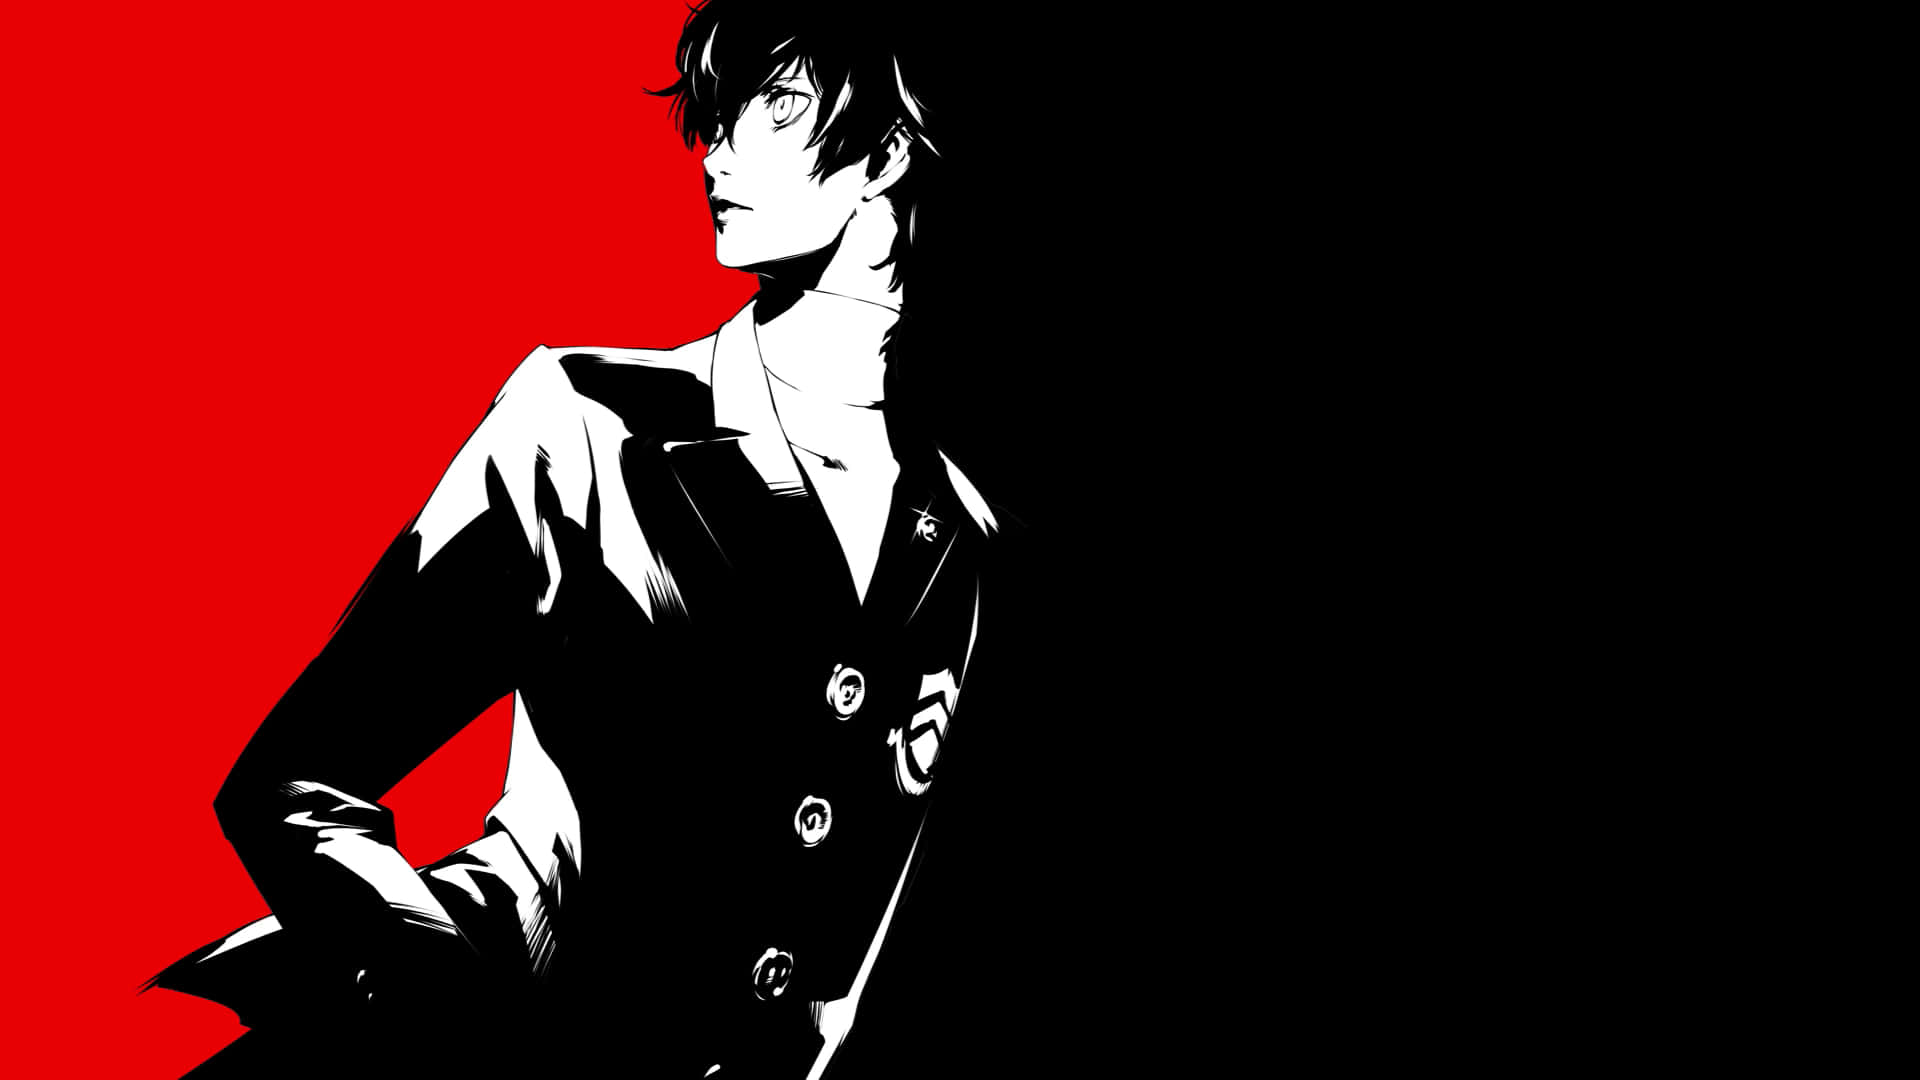 Joker Persona 5 Red And Black In Suit Wallpaper